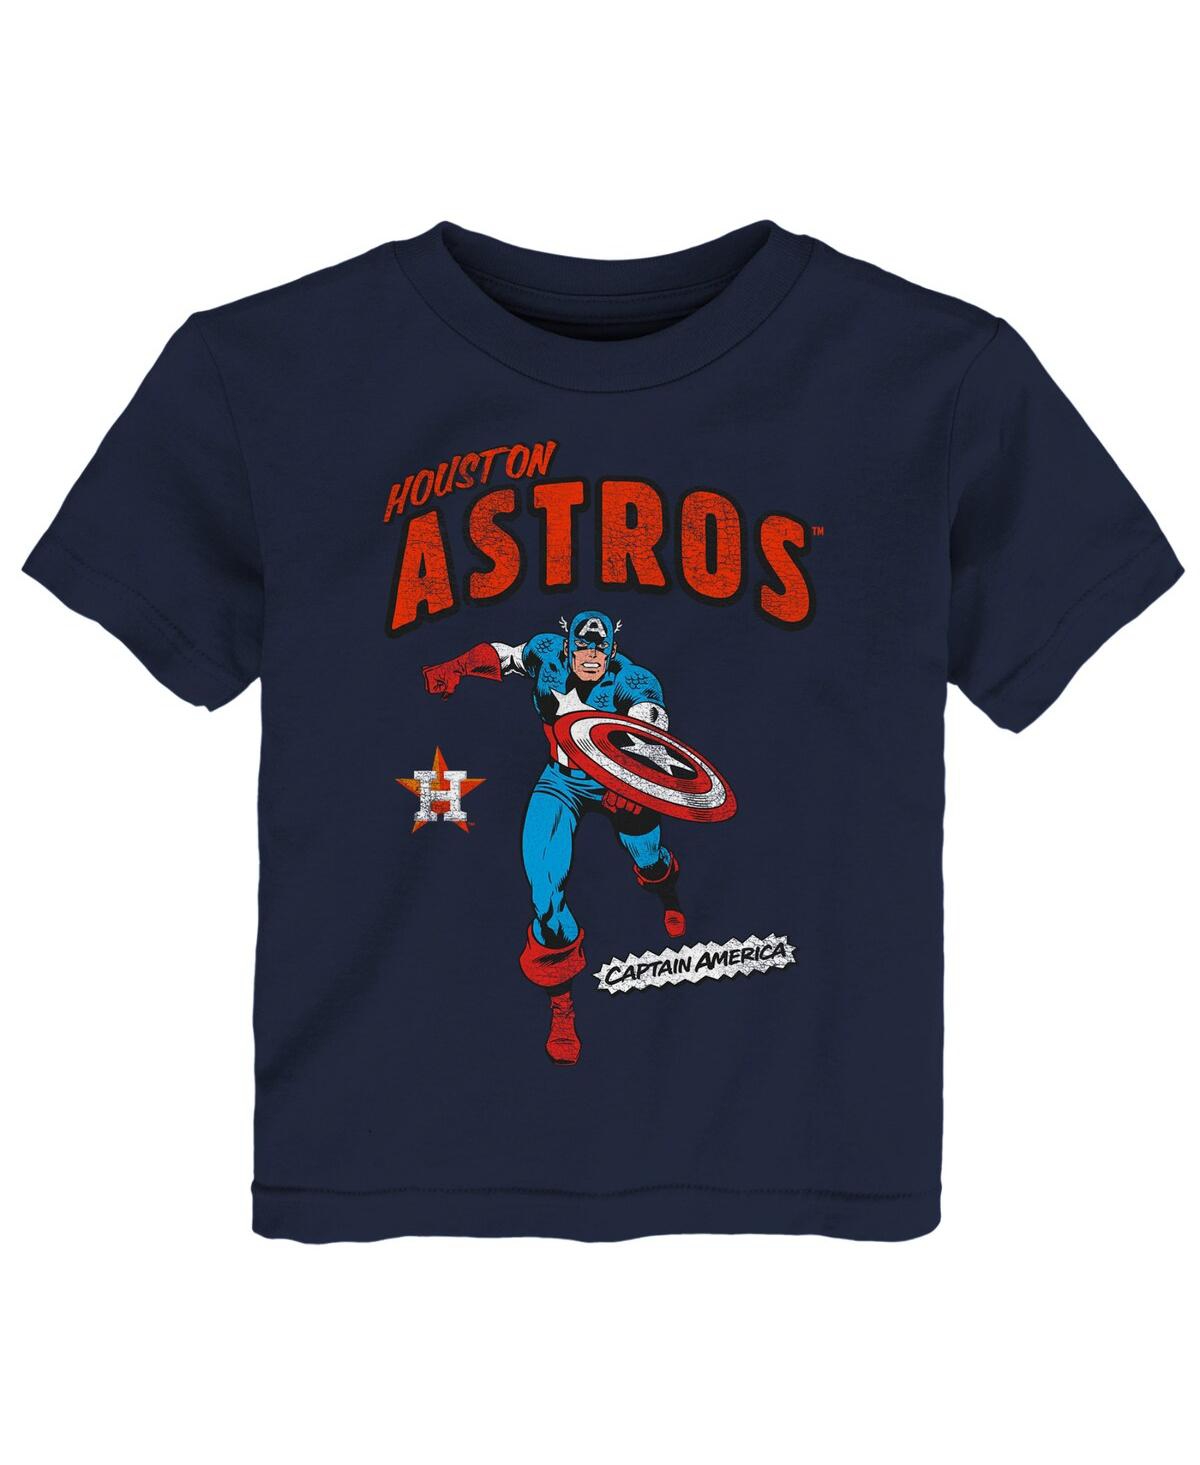 Outerstuff Babies' Toddler Boys And Girls Navy Houston Astros Team Captain America Marvel T-shirt